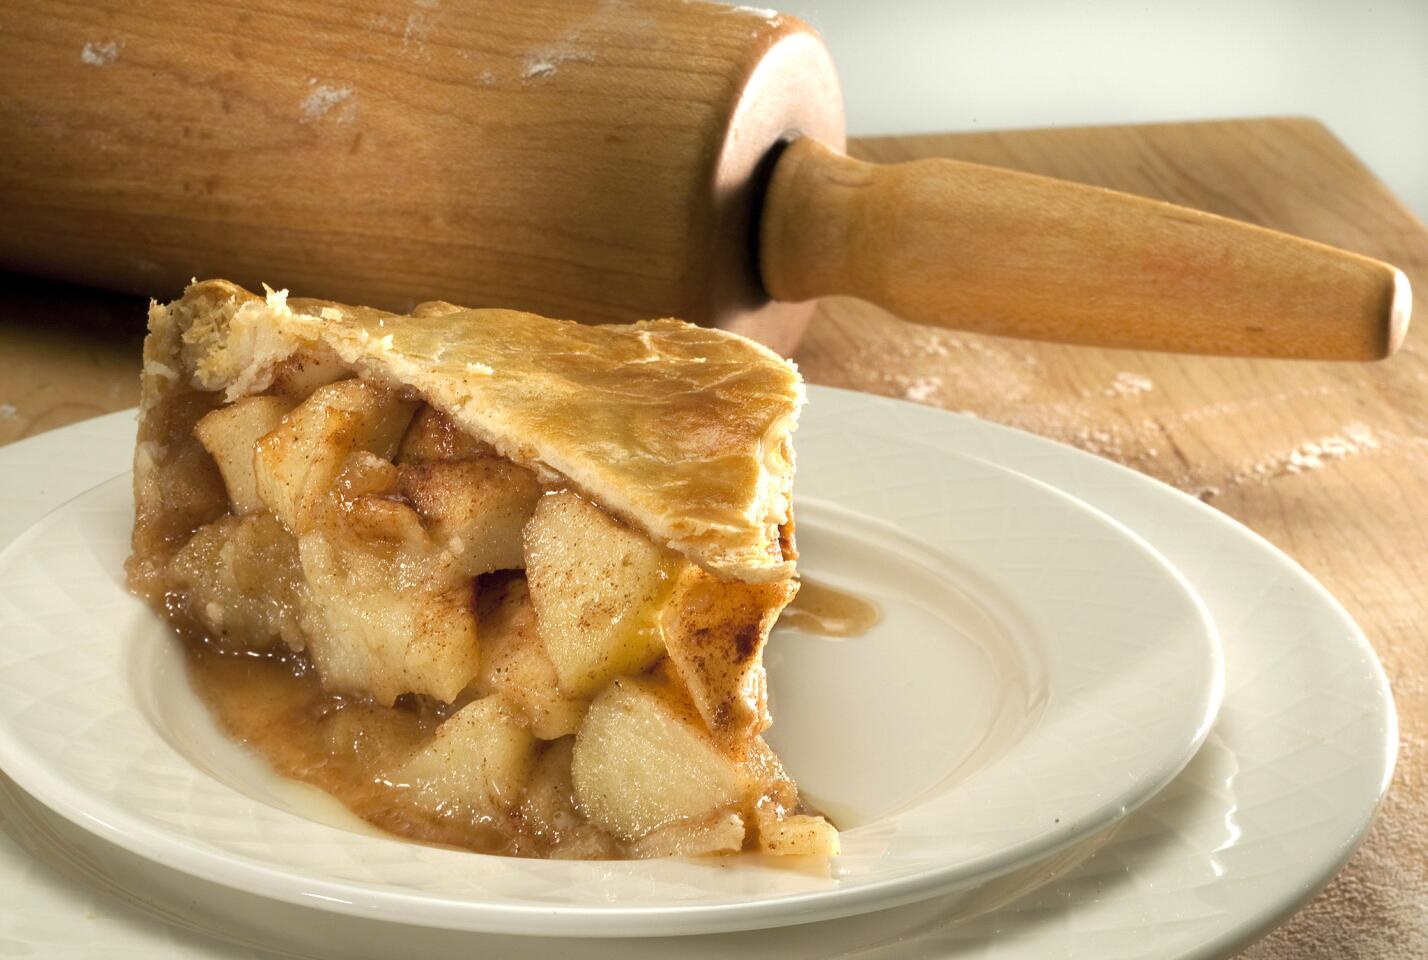 Cut into it and this award-winning apple pie is all about the fruit, generous hunks of gently baked apple, its pure, clean flavor enhanced by a sweet, spicy glaze. Click here for the recipe.